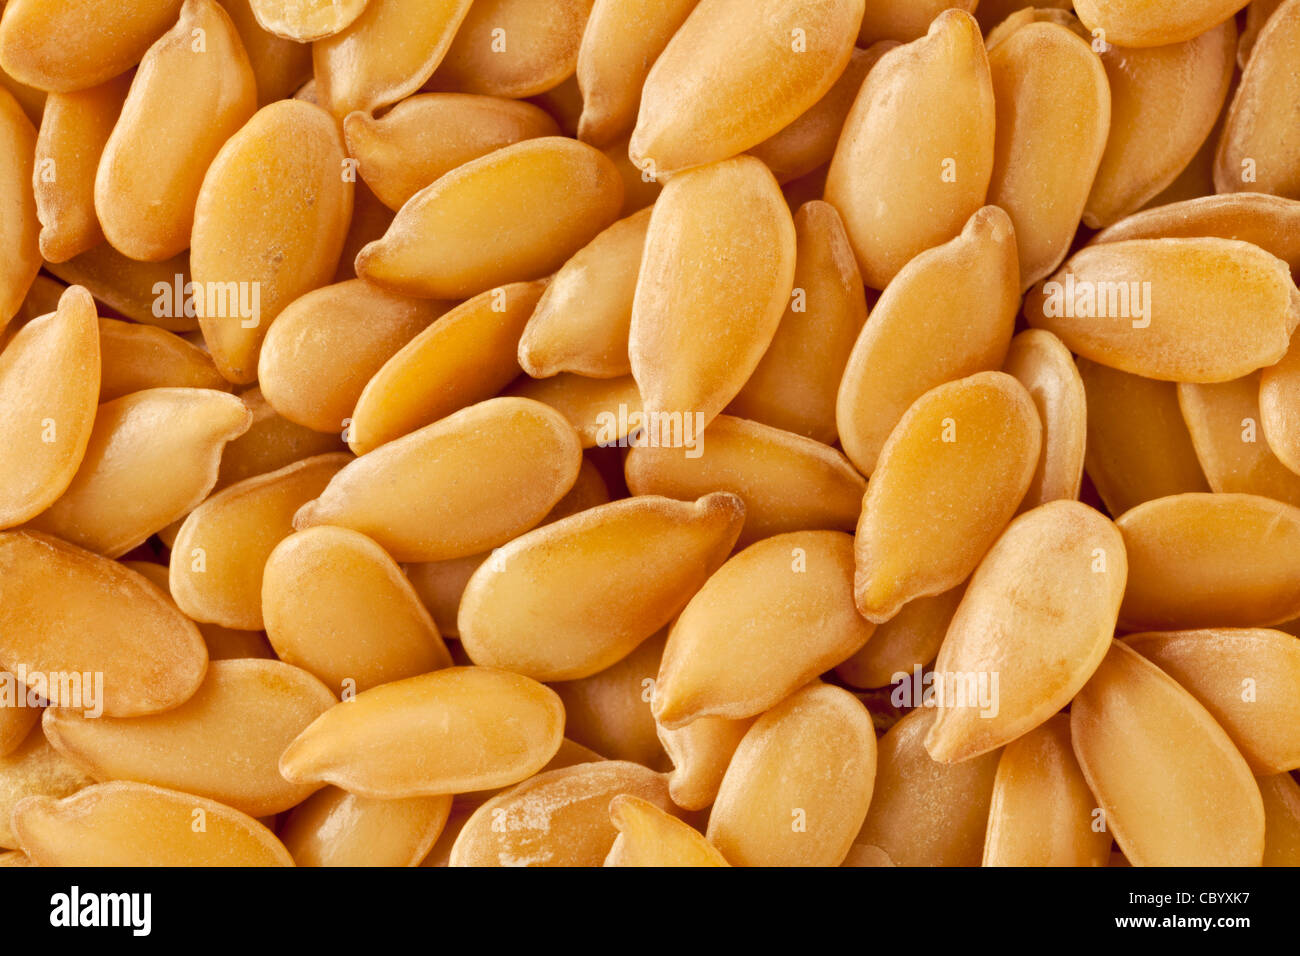 background of golden flax seeds, two times life-size magnification Stock Photo